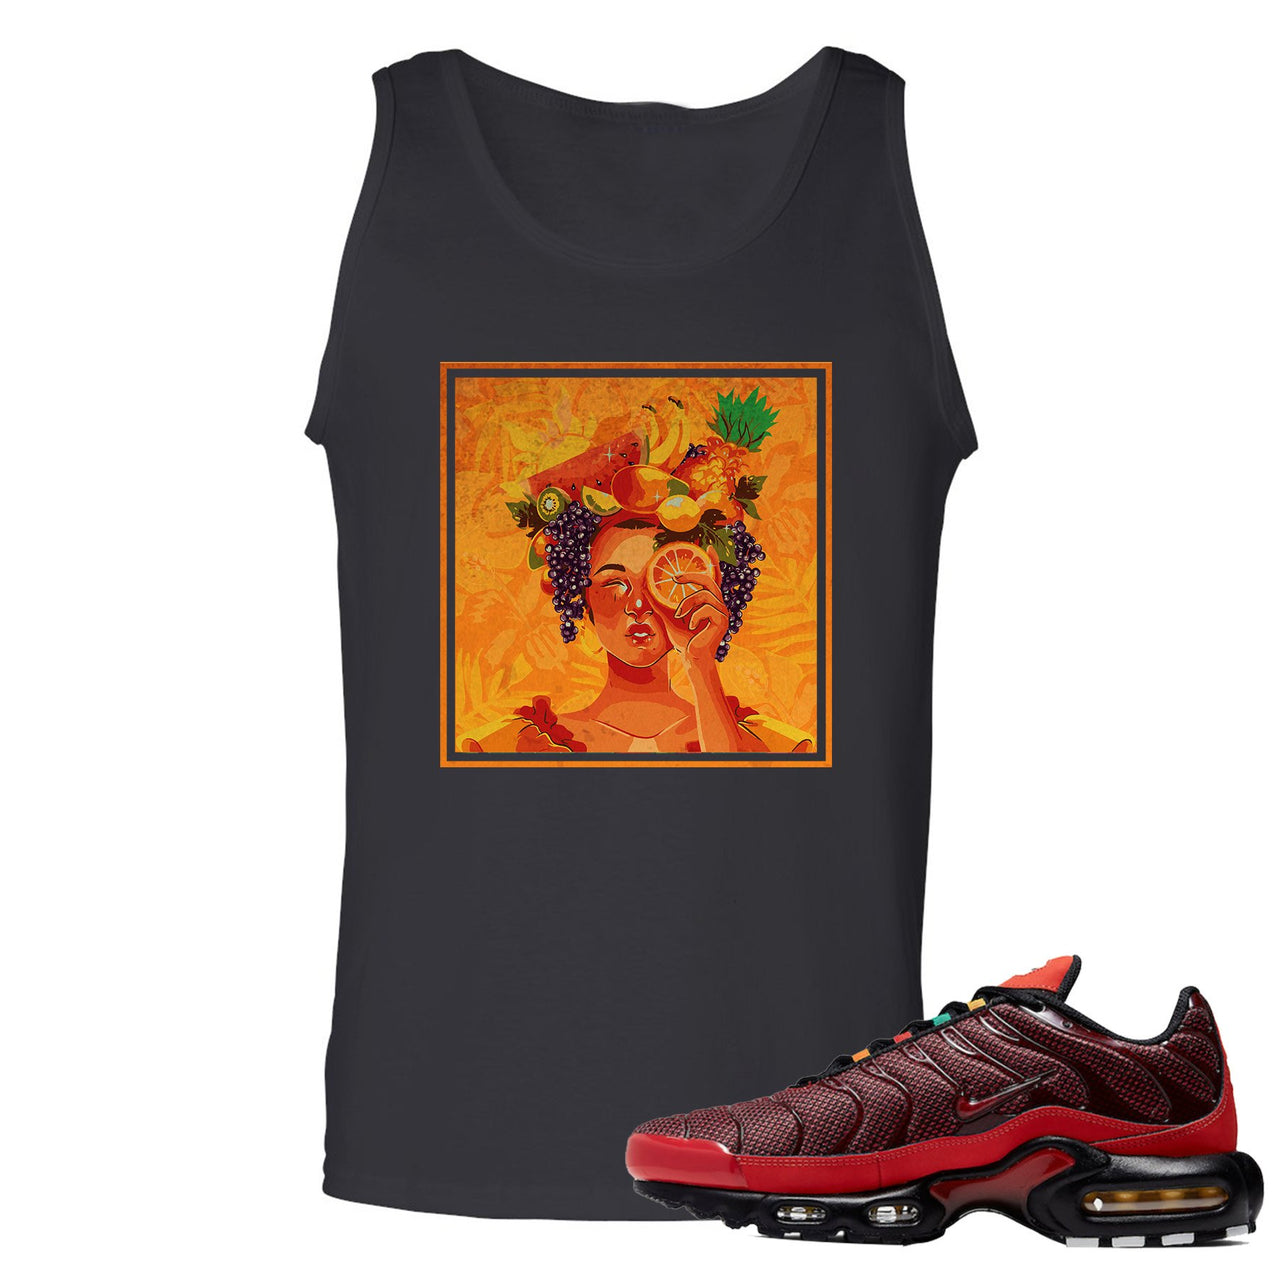 printed on the front of the nike air plus sunburst sneaker matching black tank top is the lady fruit logo